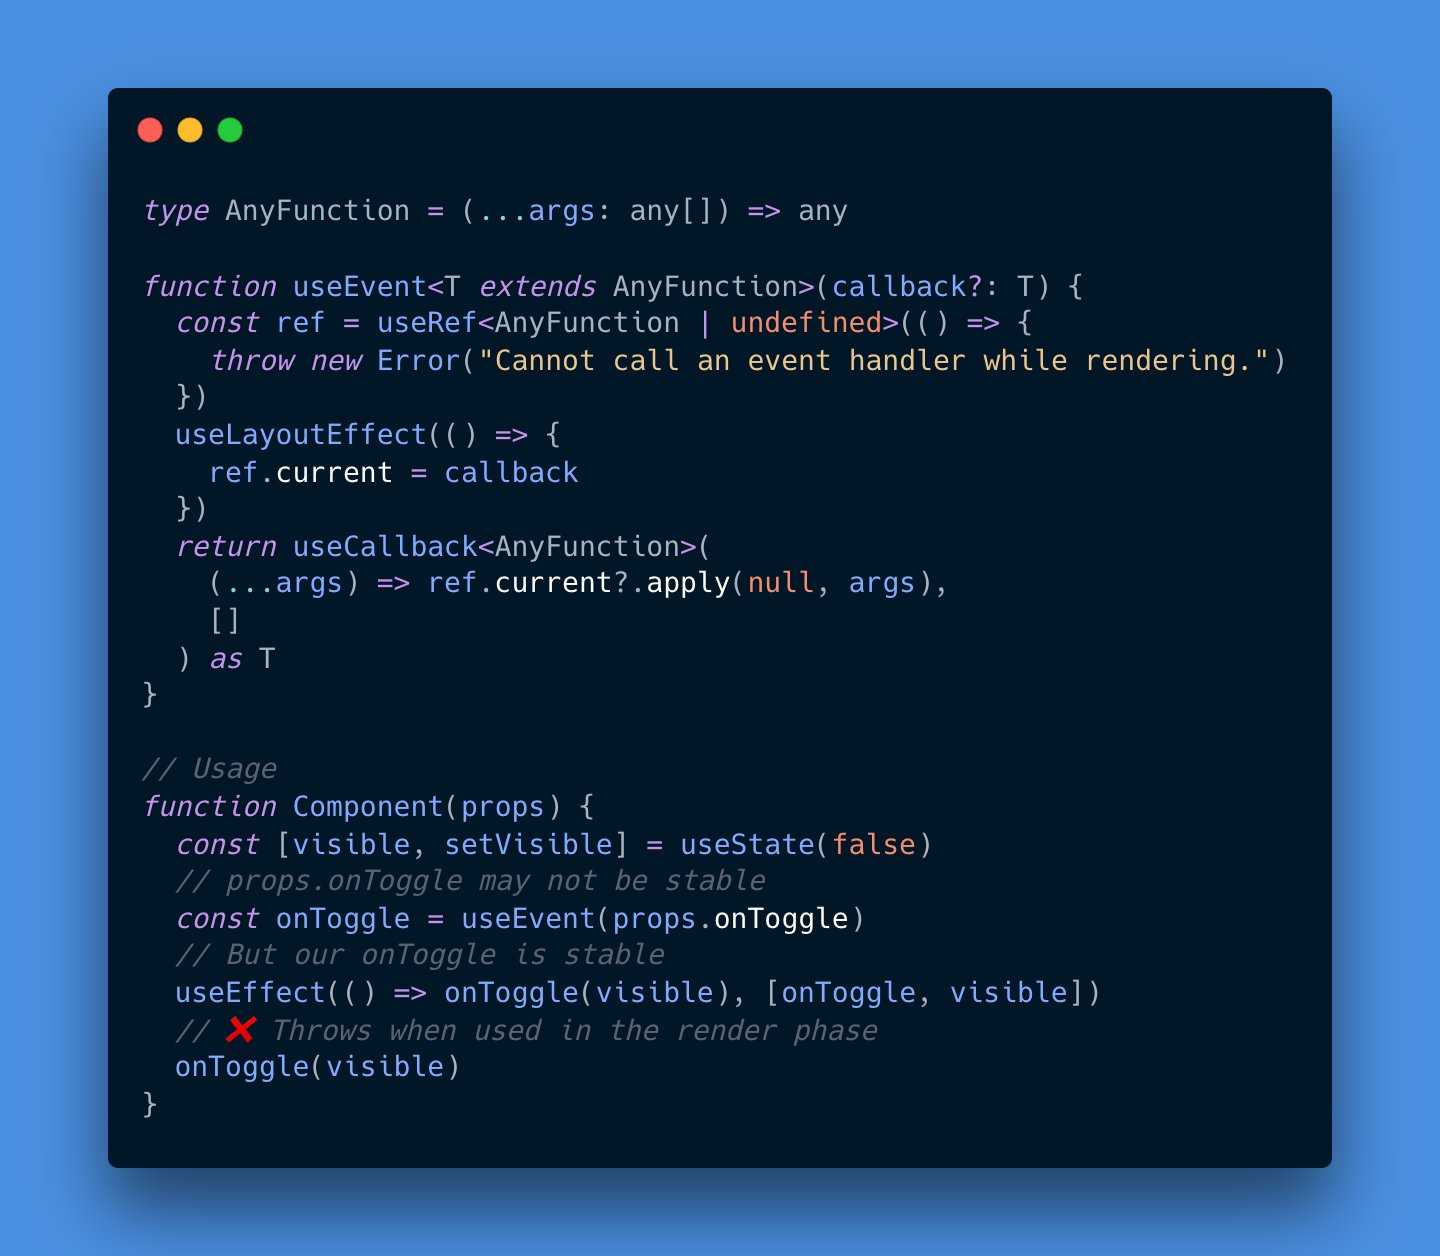 Screenshot of code where a useEvent function is defined and used. Text version available on the link in the tweet.